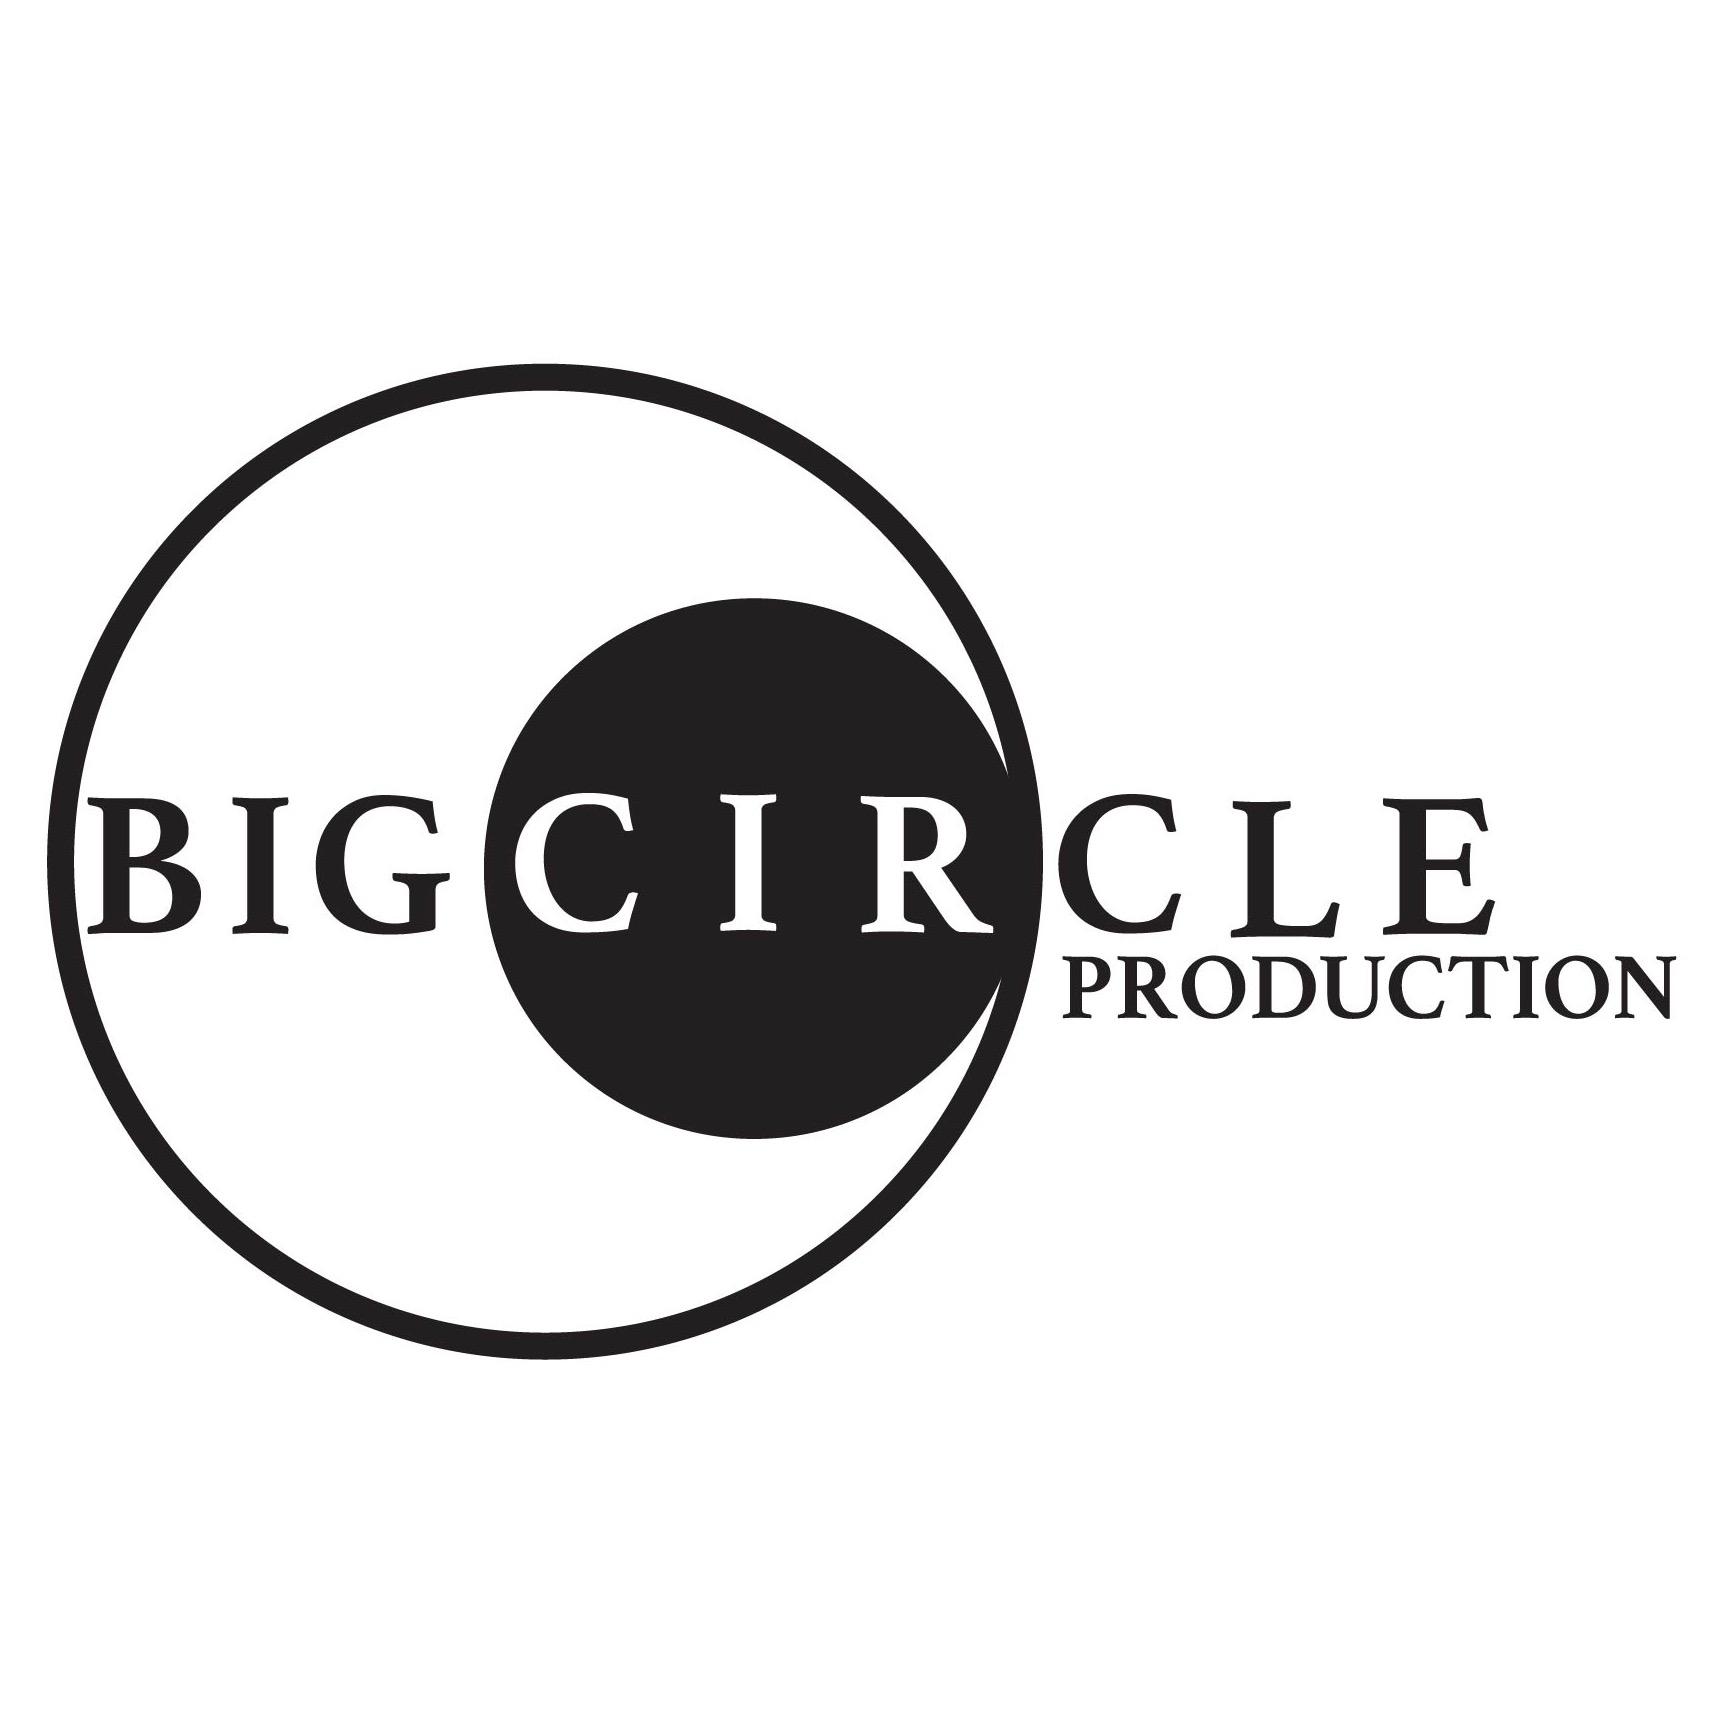 Event Planner | Event Organizer | For more info : bigcircleproduction@gmail.com